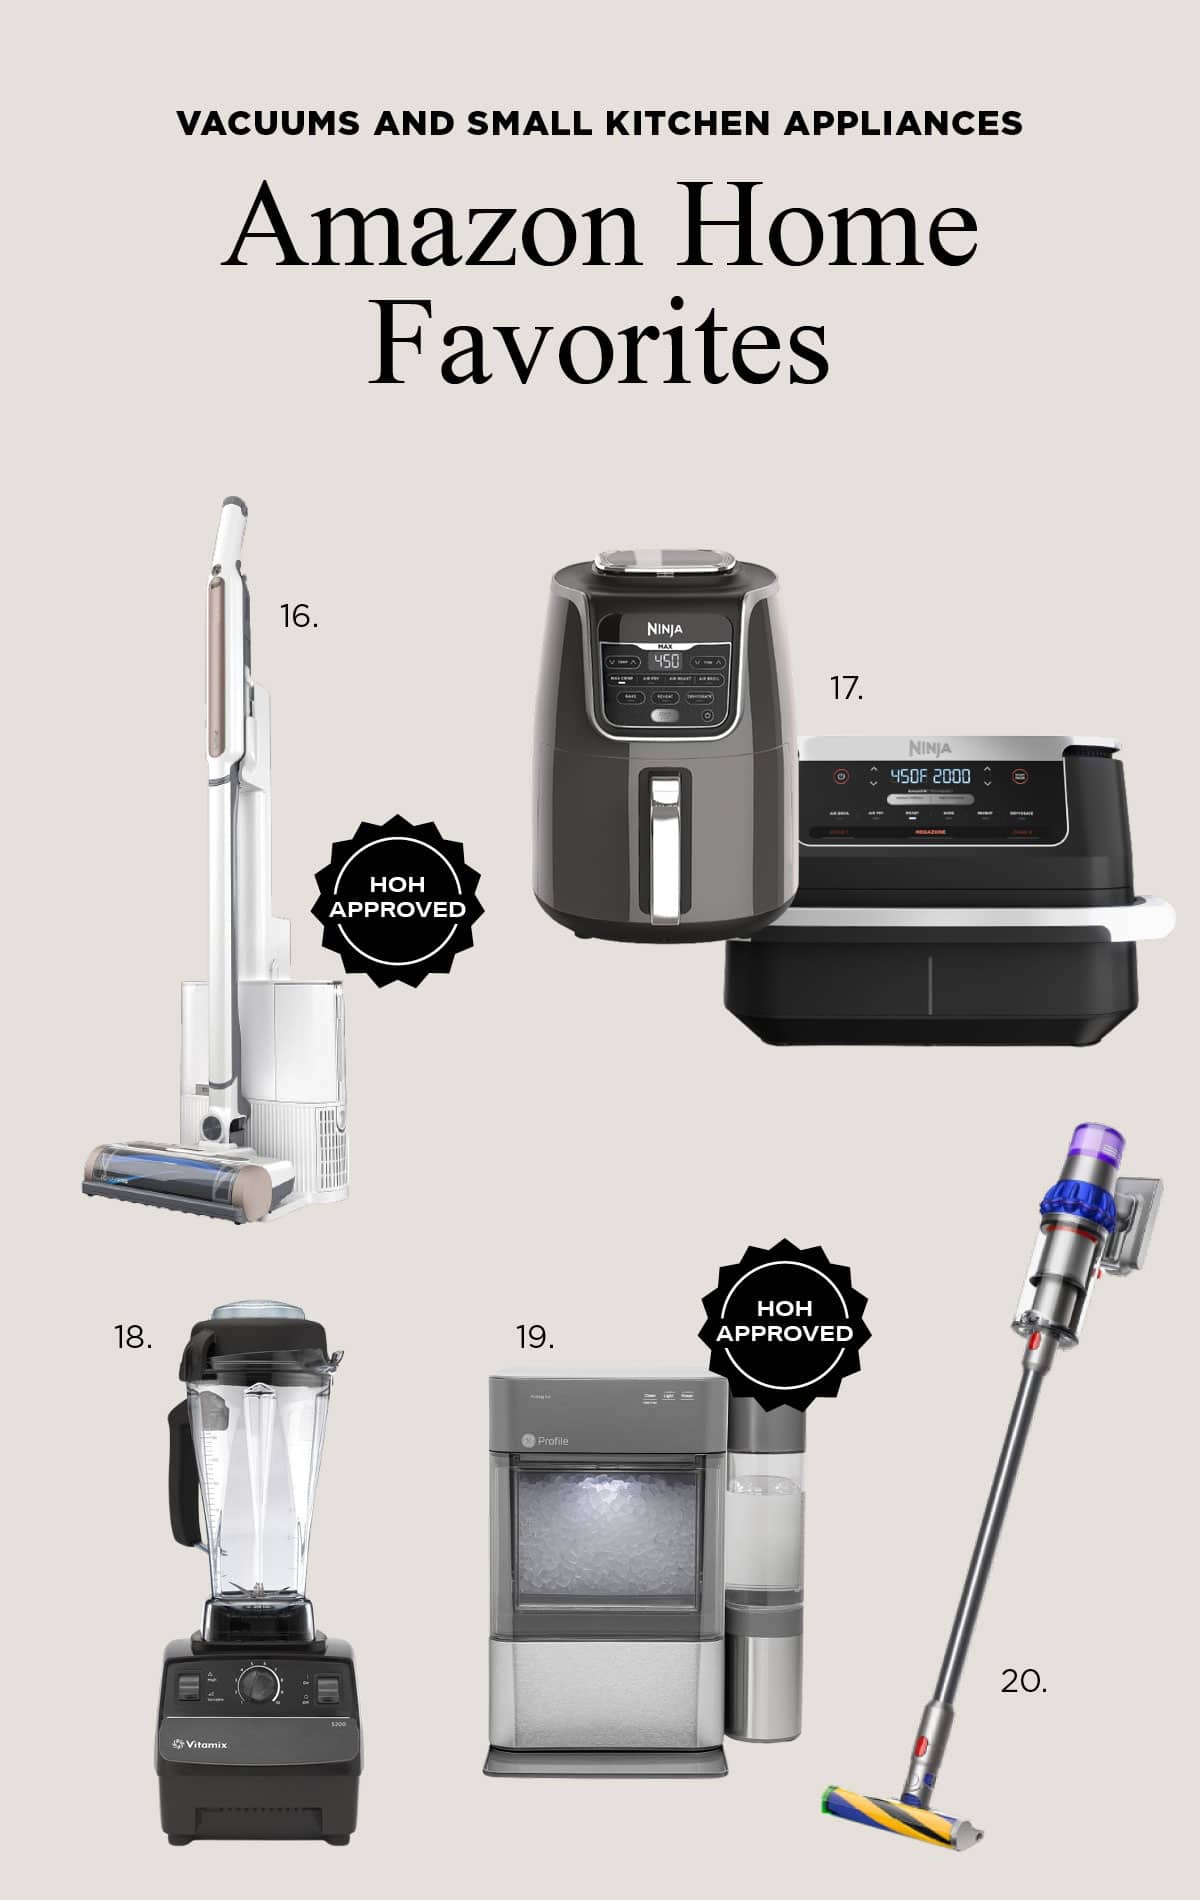 Vacuums and Kitchen Appliances Amazon Prime Big Deal Days - Check out the best of vacuums and small kitchen appliances like the Ninja Air Fryer and the nugget ice machine